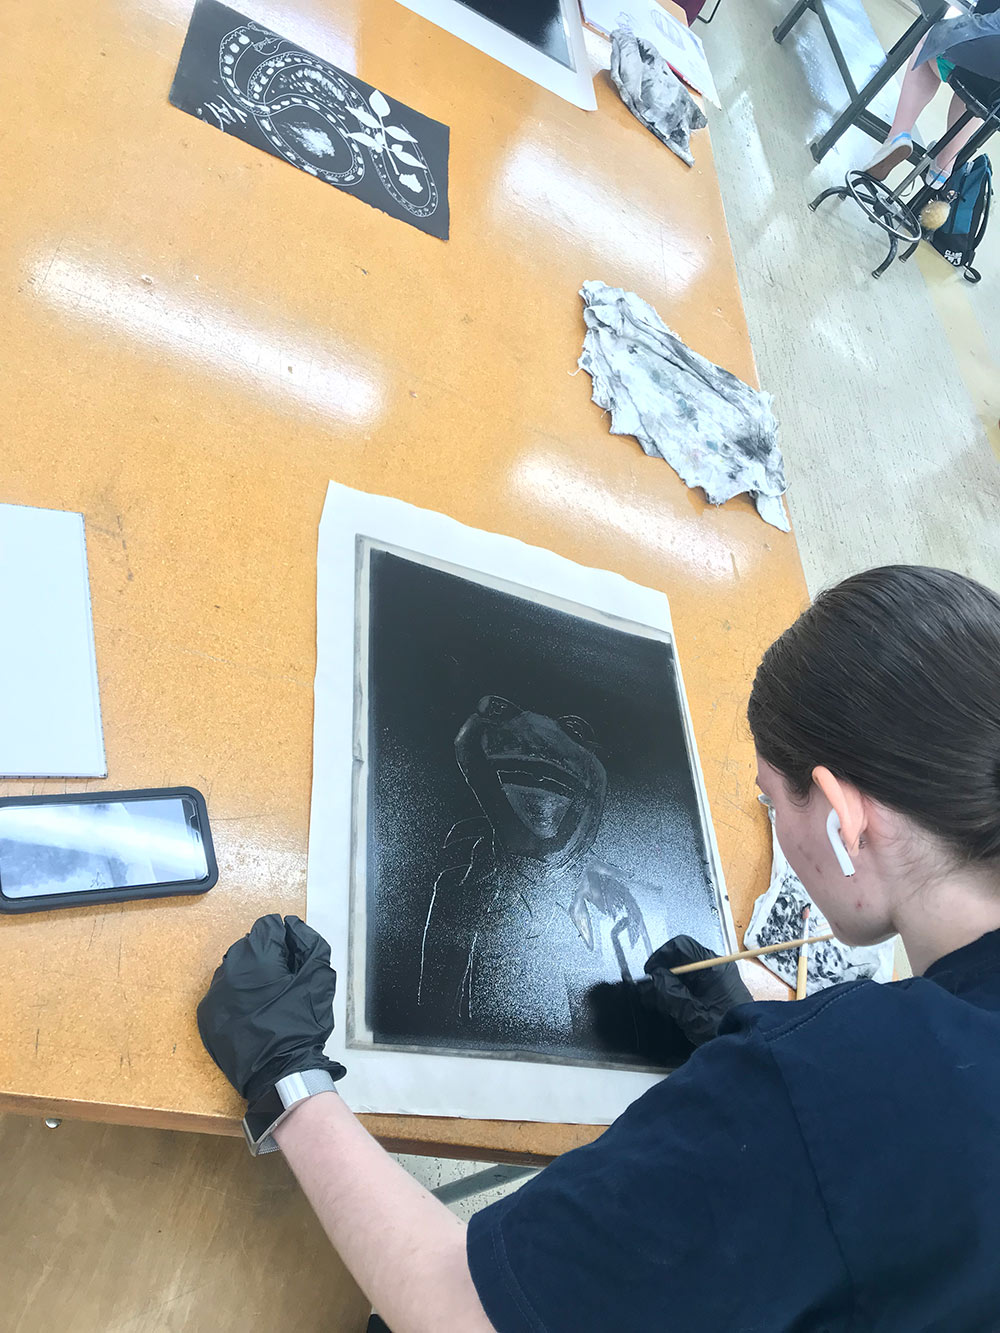 student works on monoprint project - back seen